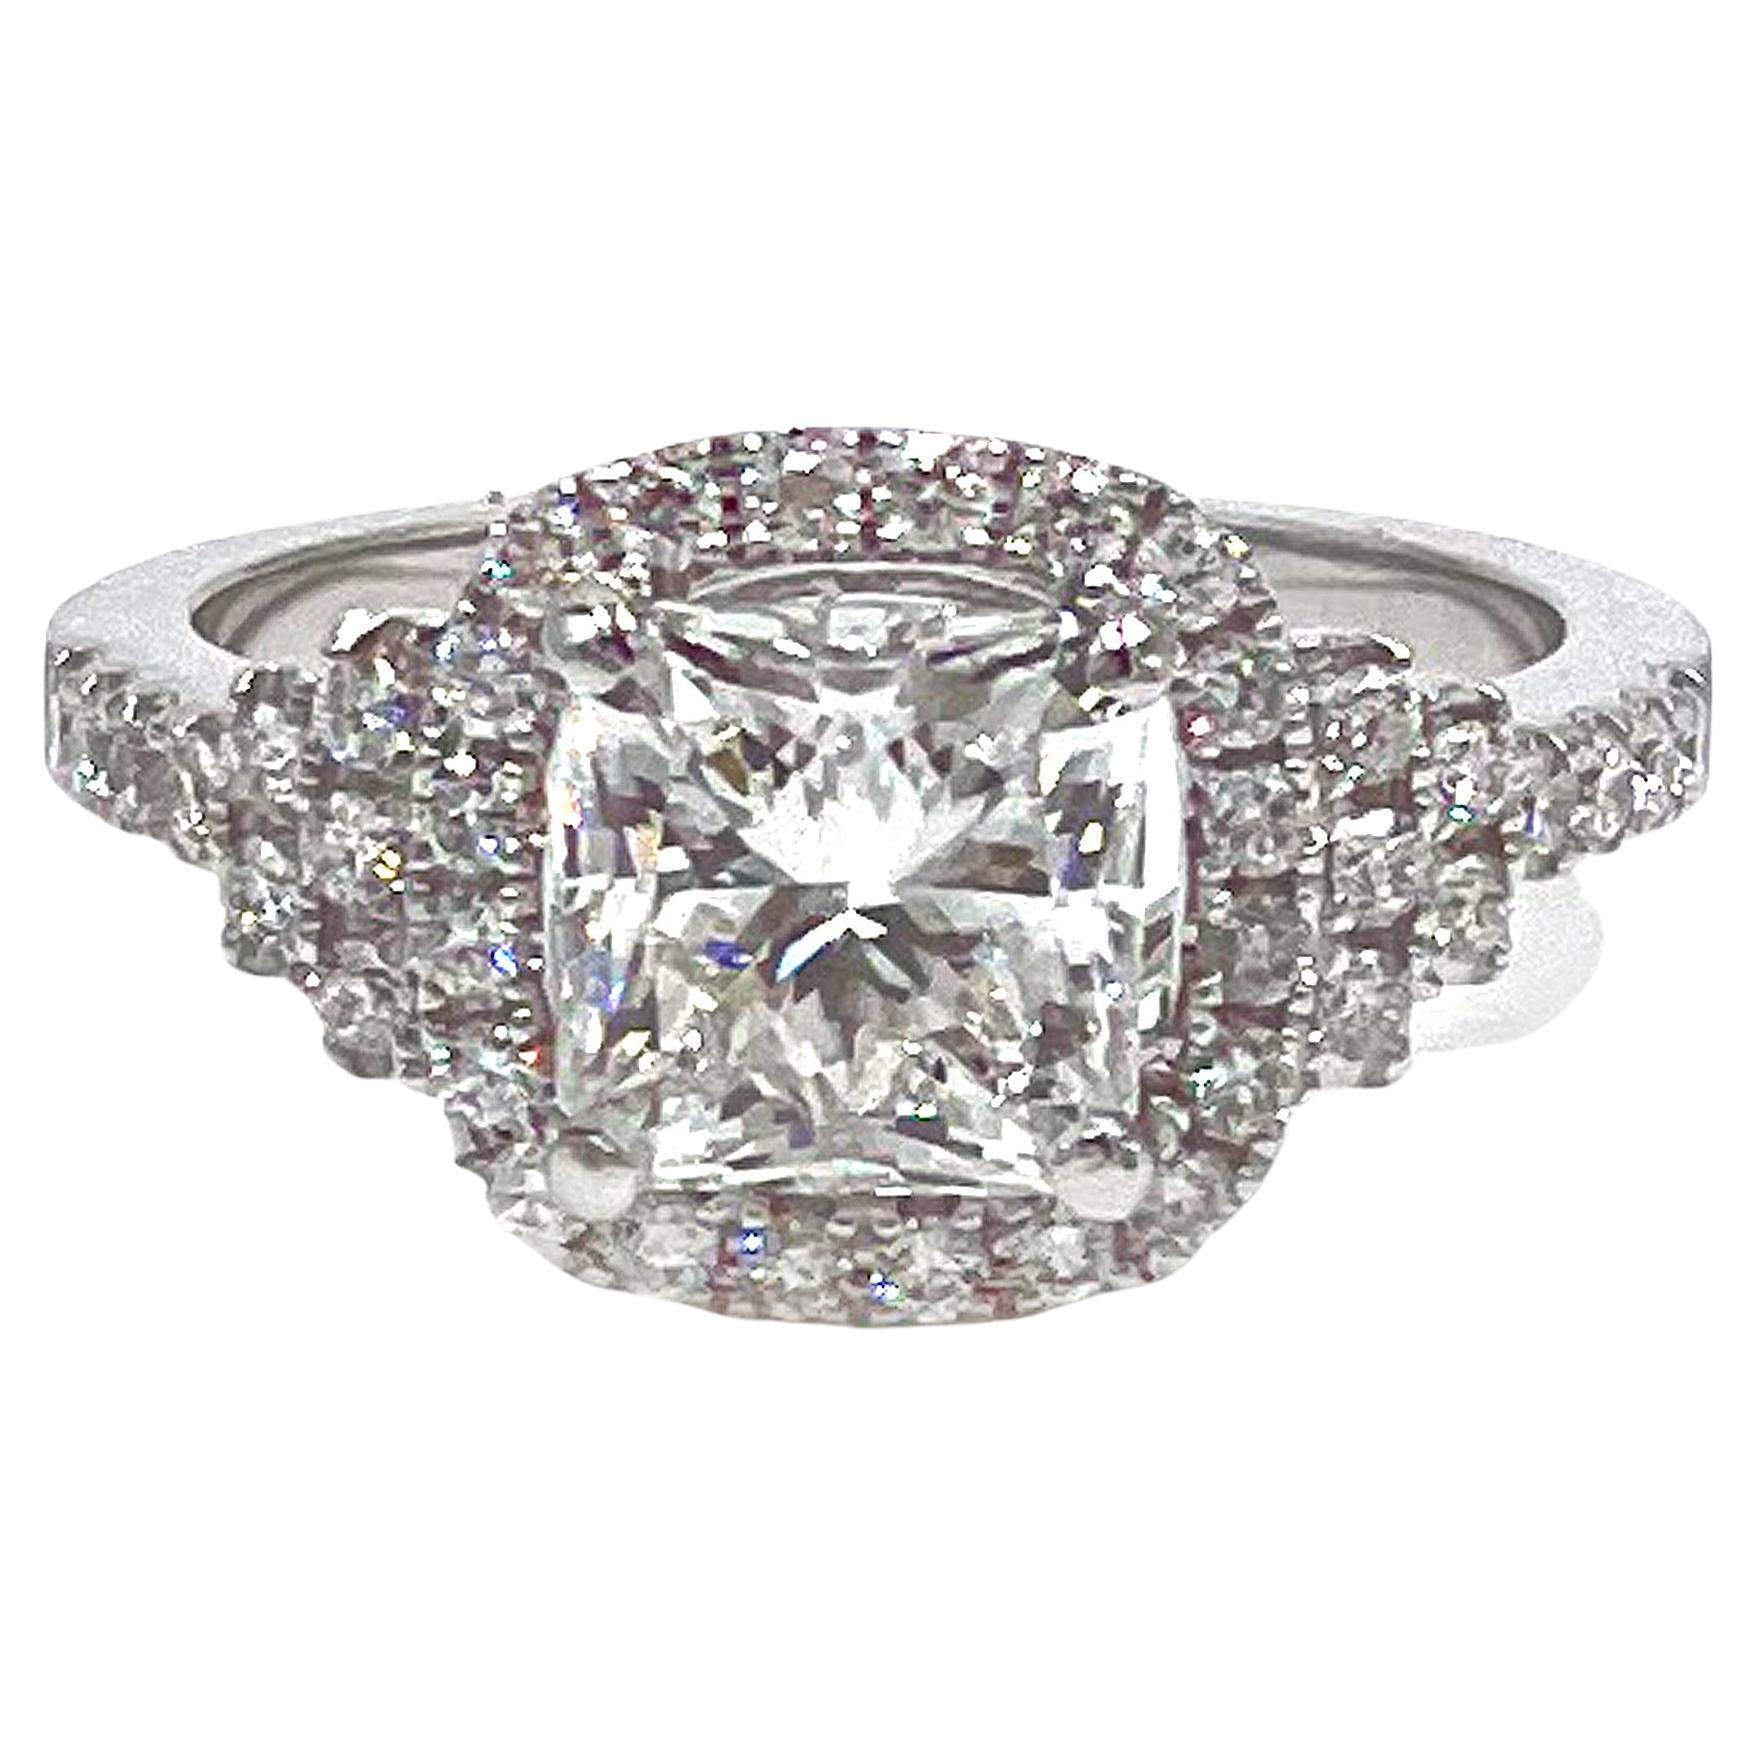 18K White Gold Radiant-Cut Engagement Ring, 2.03 Carats, GIA Certified